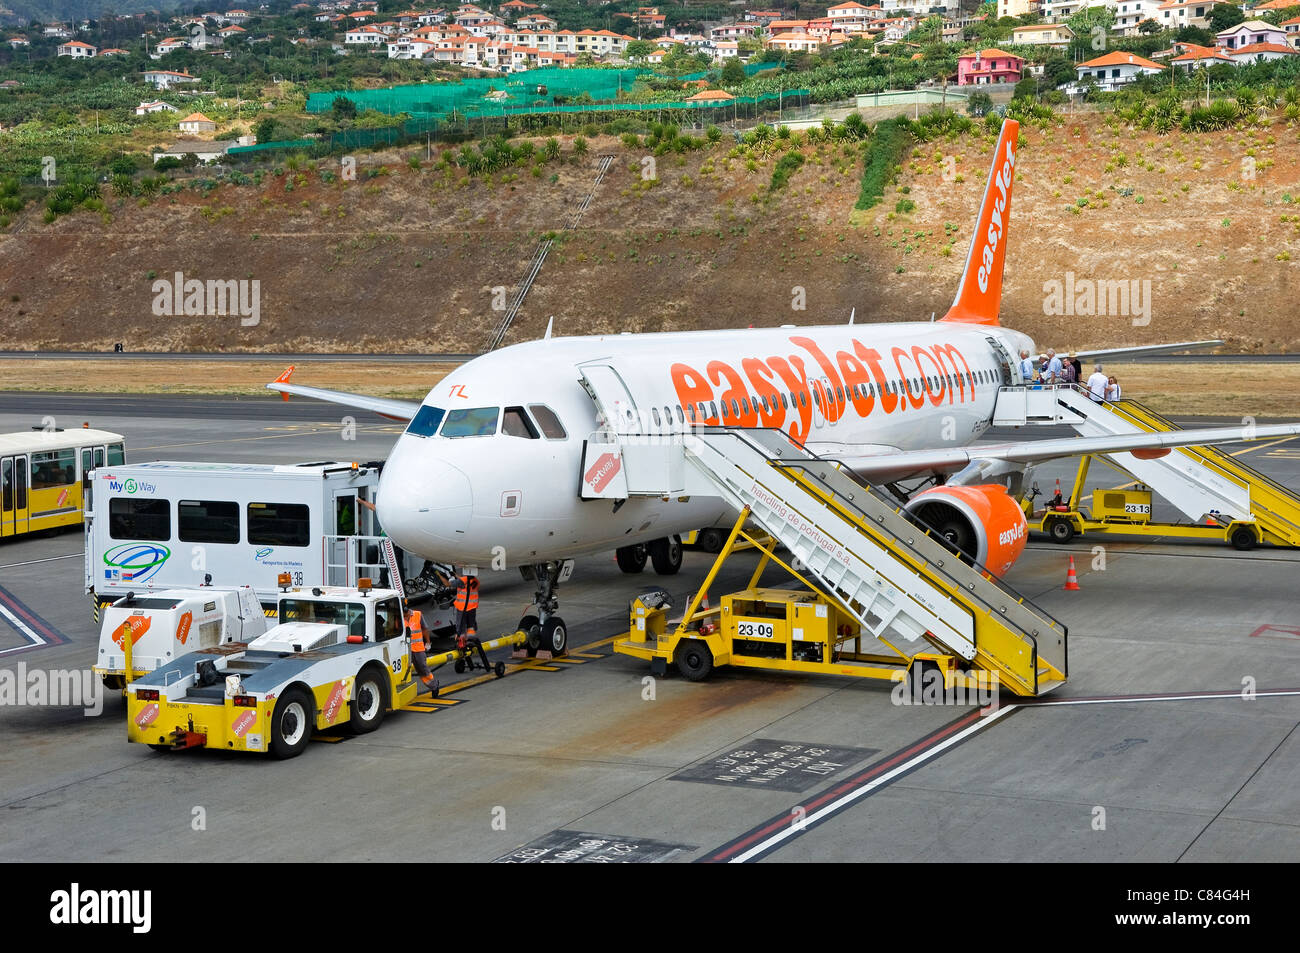 EasyJet plane airplane aircraft parked at Funchal airport Madeira Portugal EU Europe Stock Photo